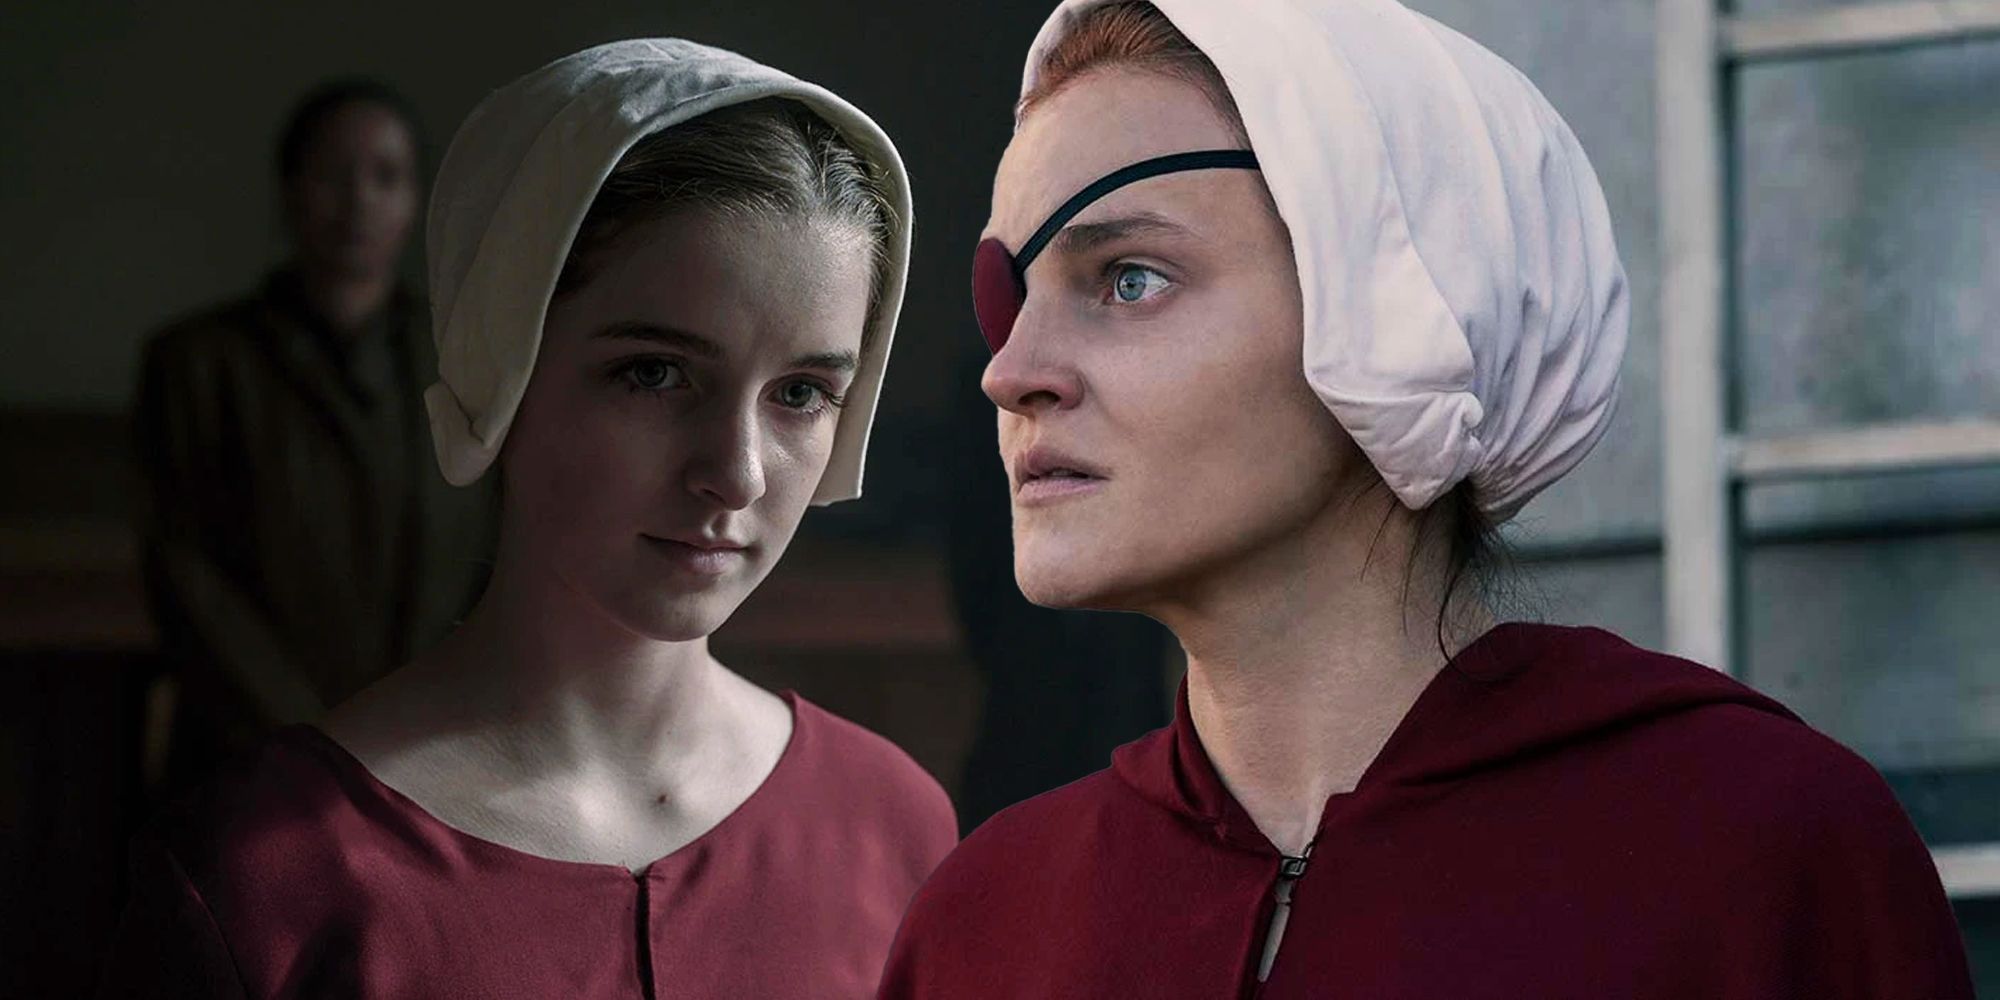 Jeanine and Esther in The Handmaid's Tale